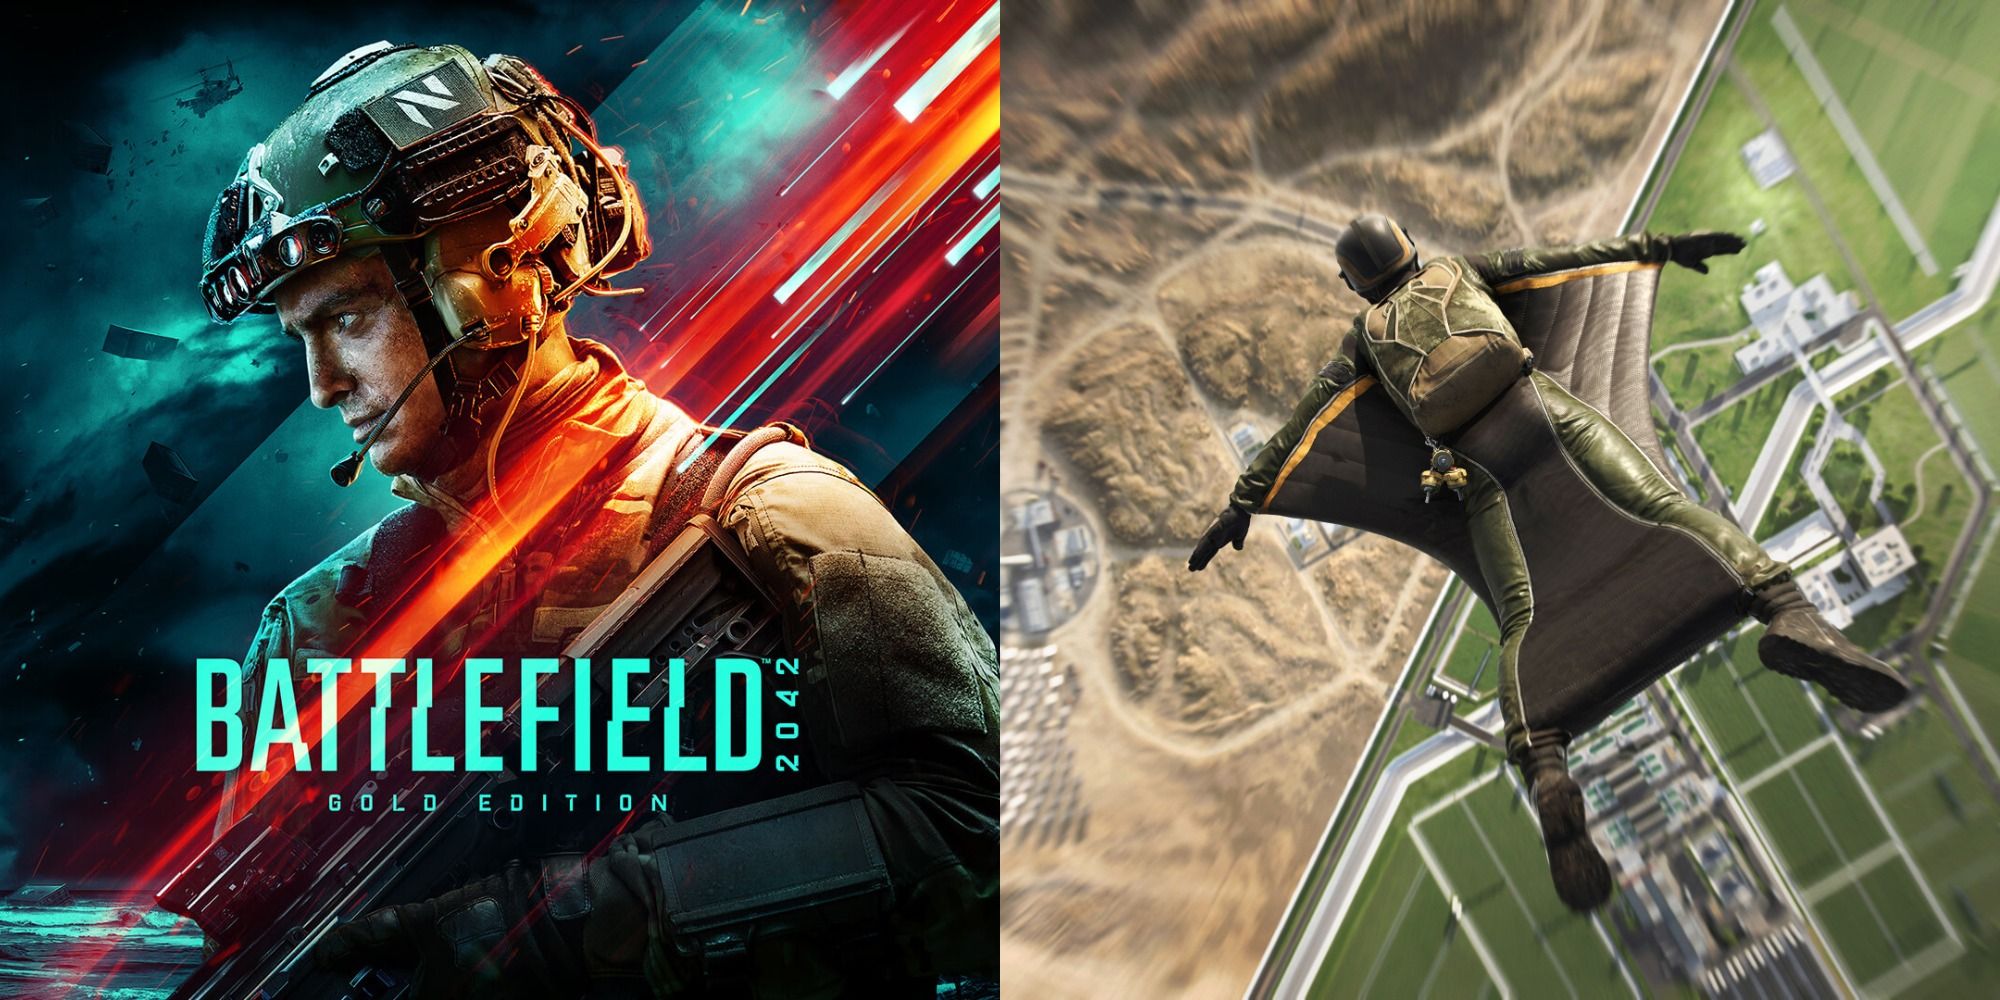 Split image showing the cover of Battlefield 2042, and a character jumping while wearing a winged suit